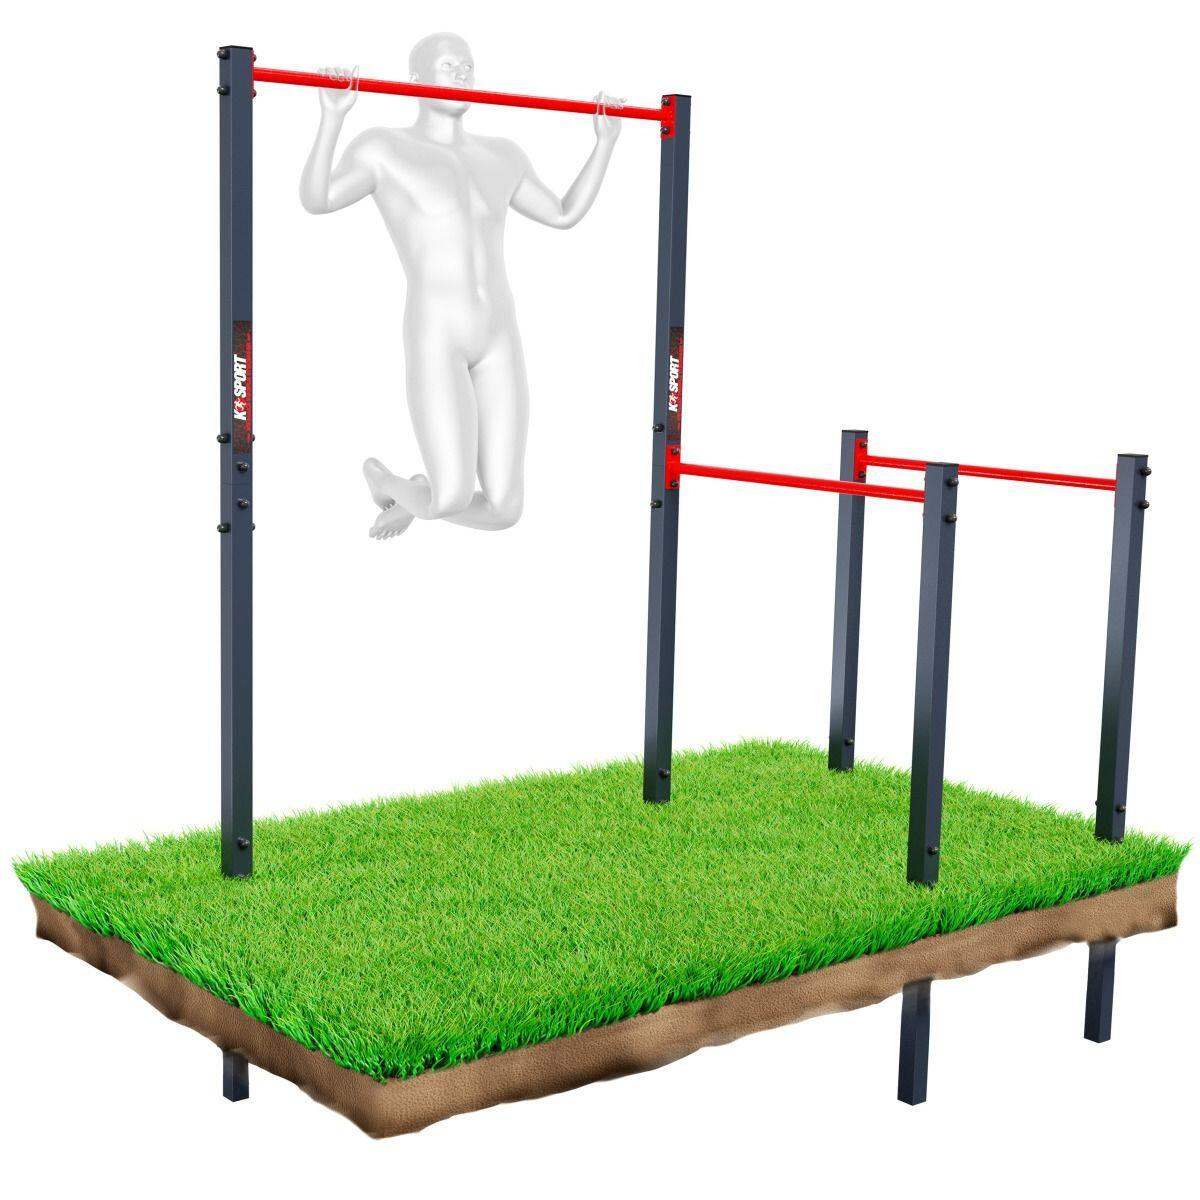 OUTDOOR GYM PULL UP BAR DIP STATION 1/5